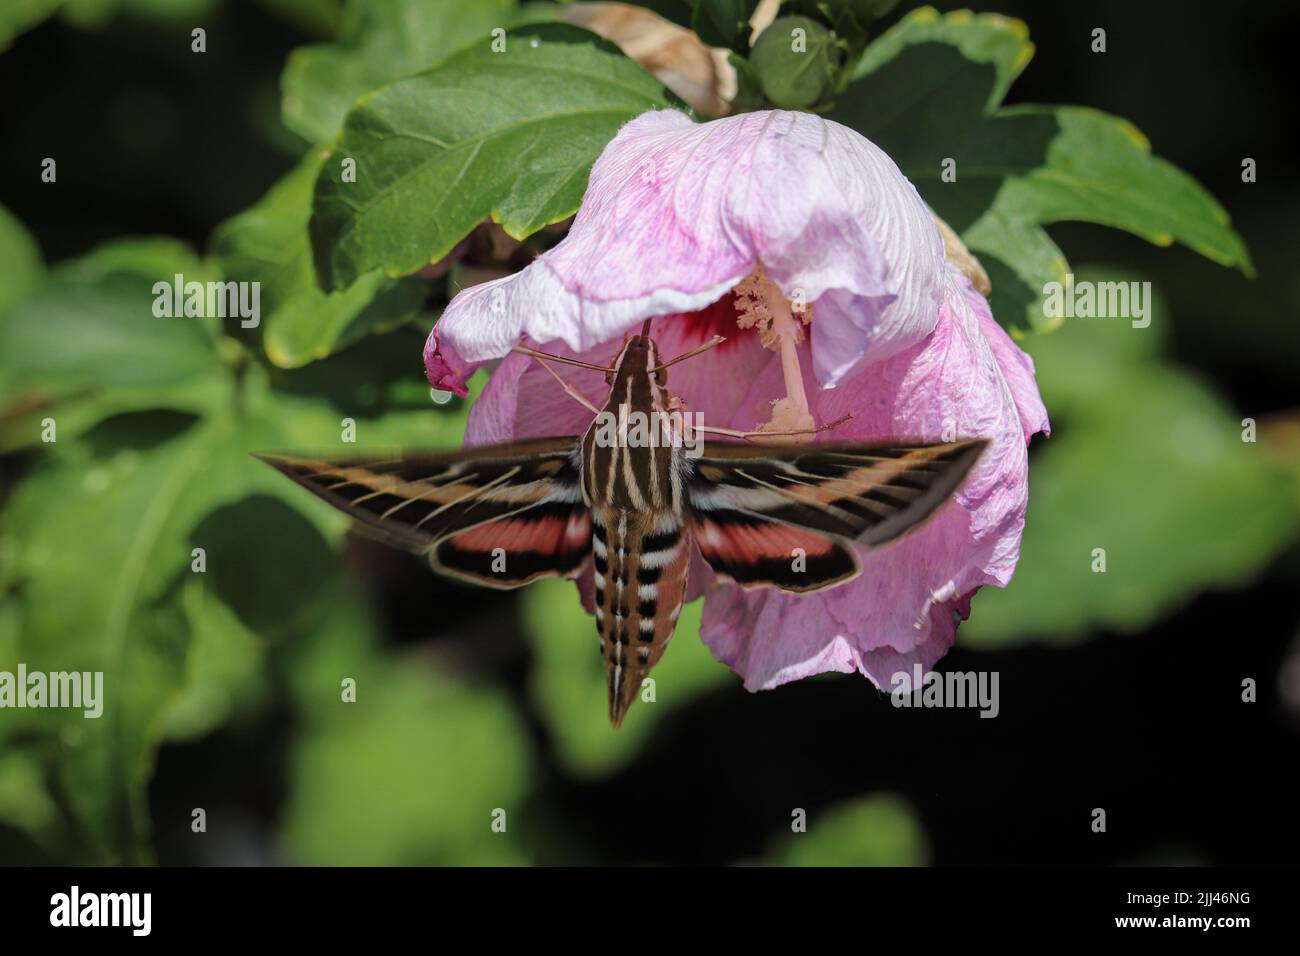 White-lined sphinx moth or Hyles lineata feeding on hibiscus flower at Plant Fair Nursery in Star Valley, Arizona. Stock Photo